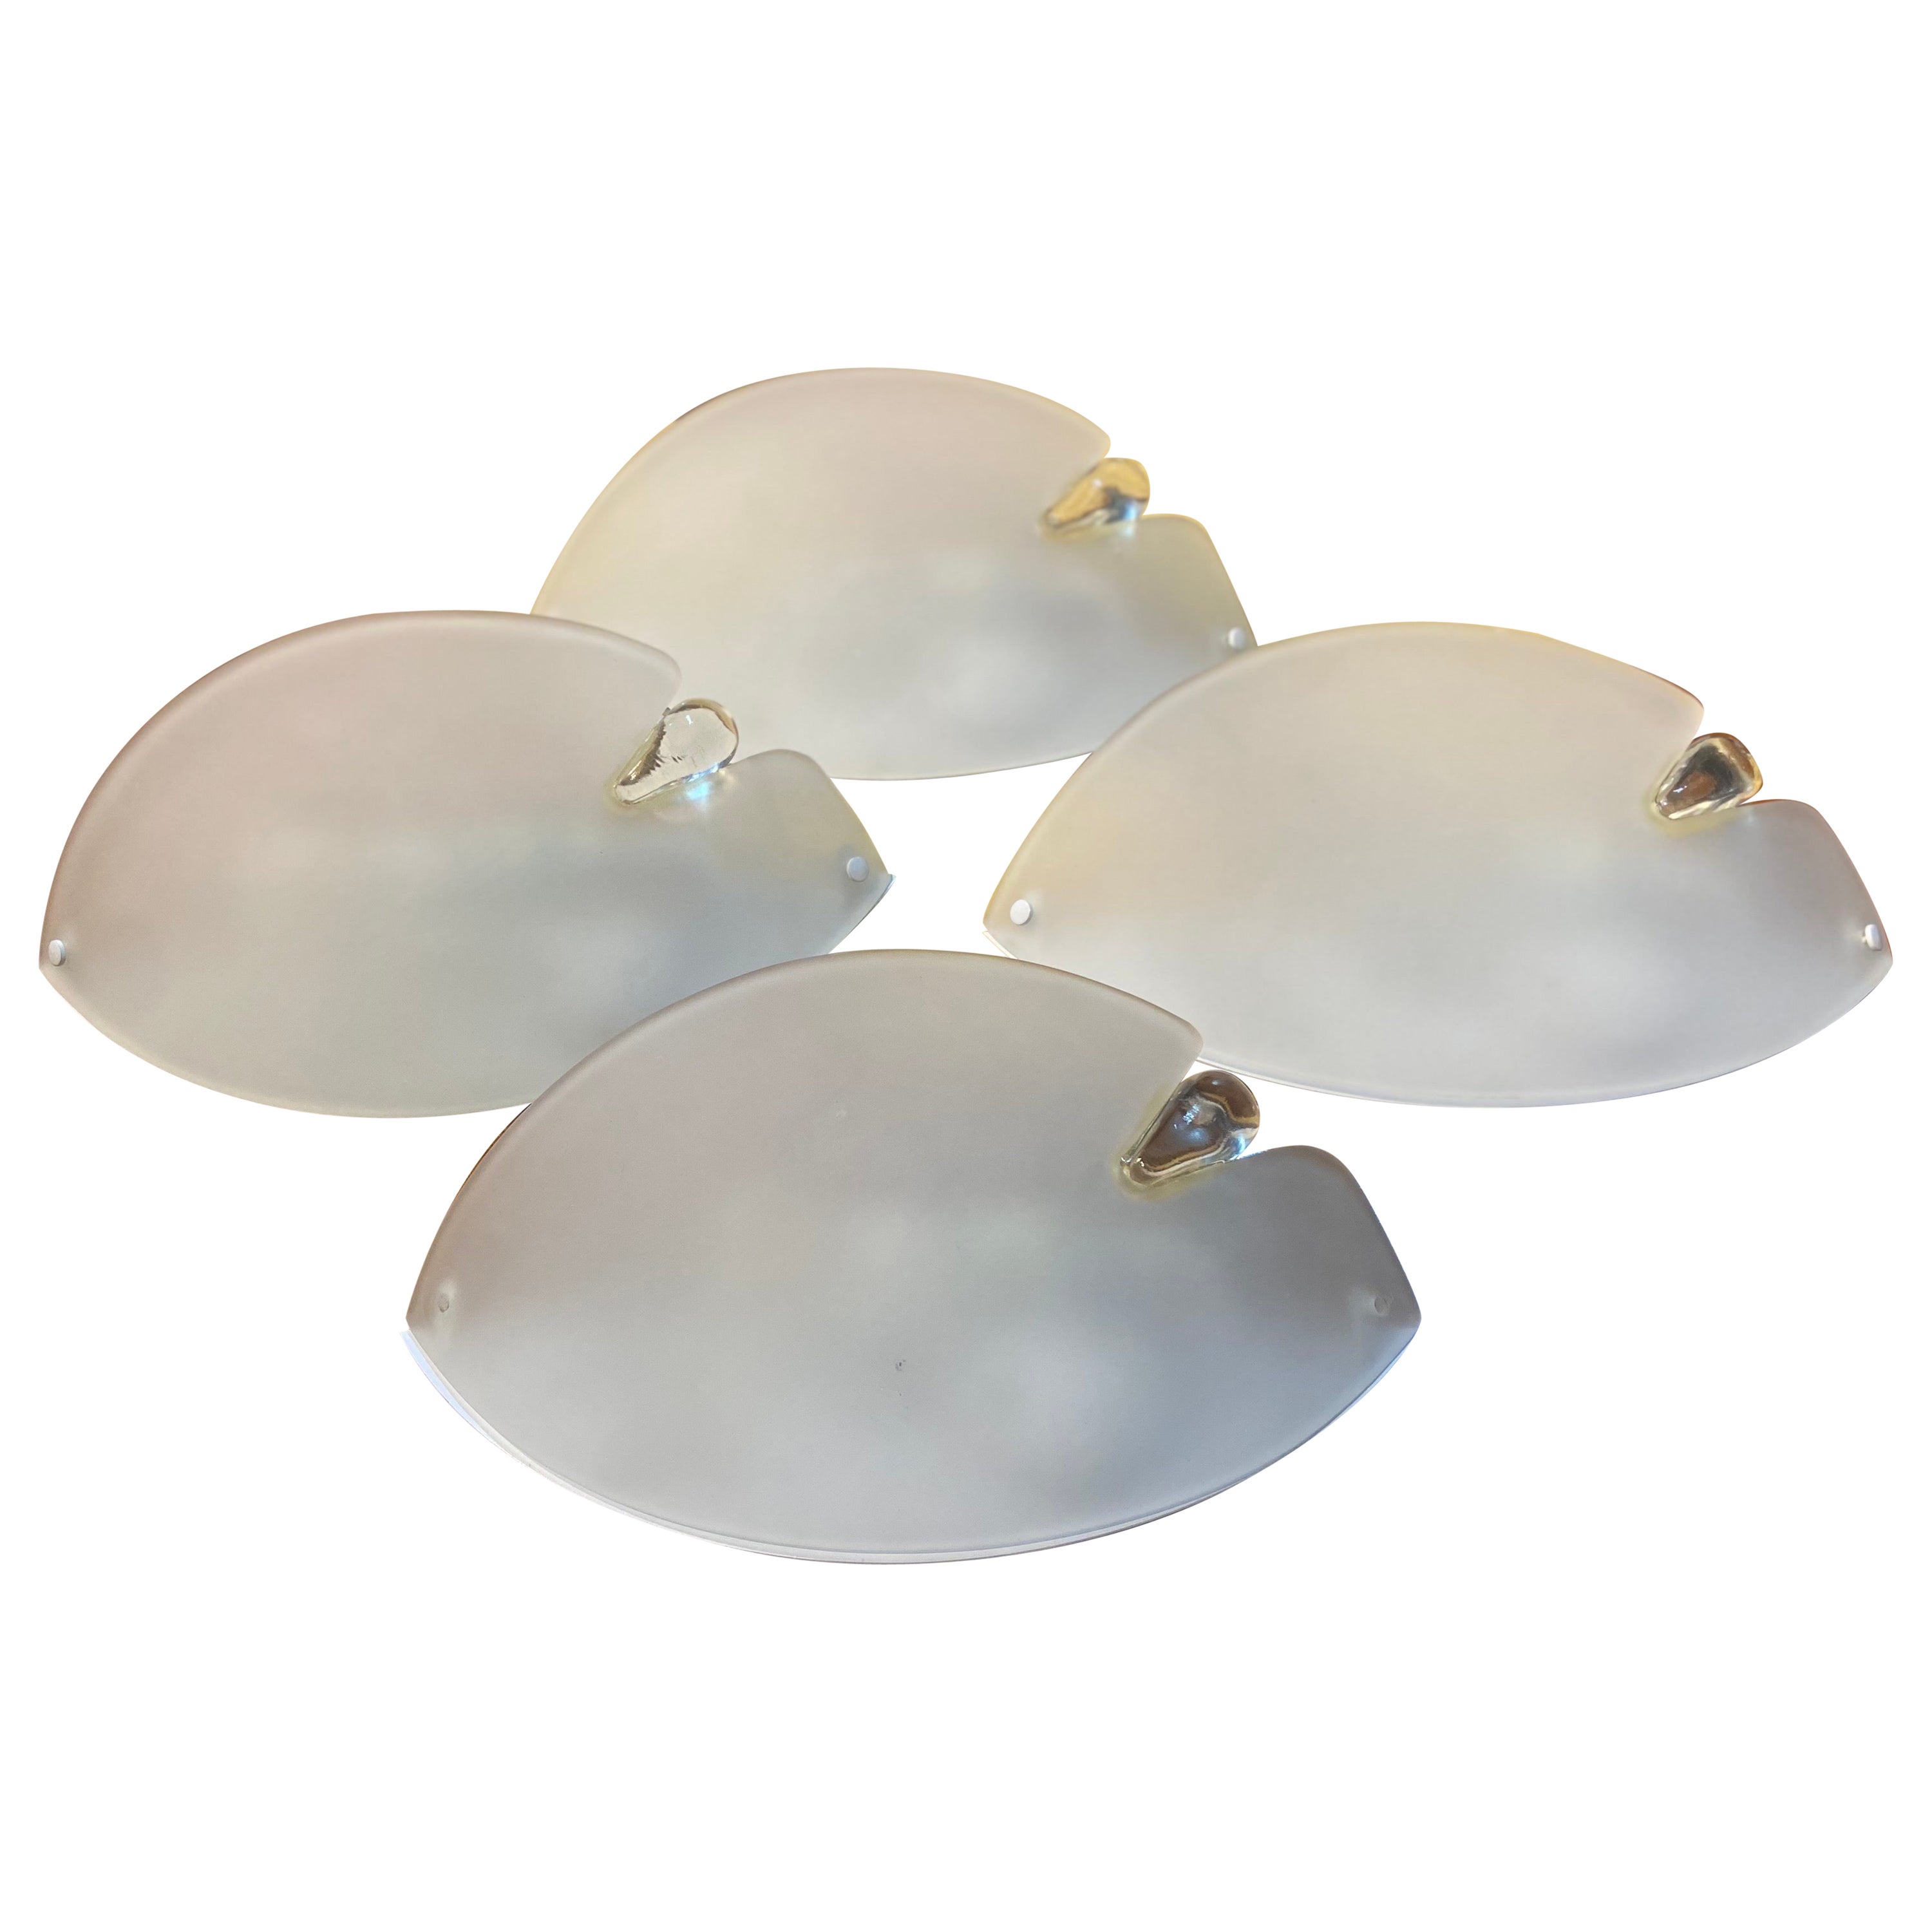 Four Italian Modern Wall Lights Hand Crafted Smoked Murano Glass By AV Mazzega For Sale